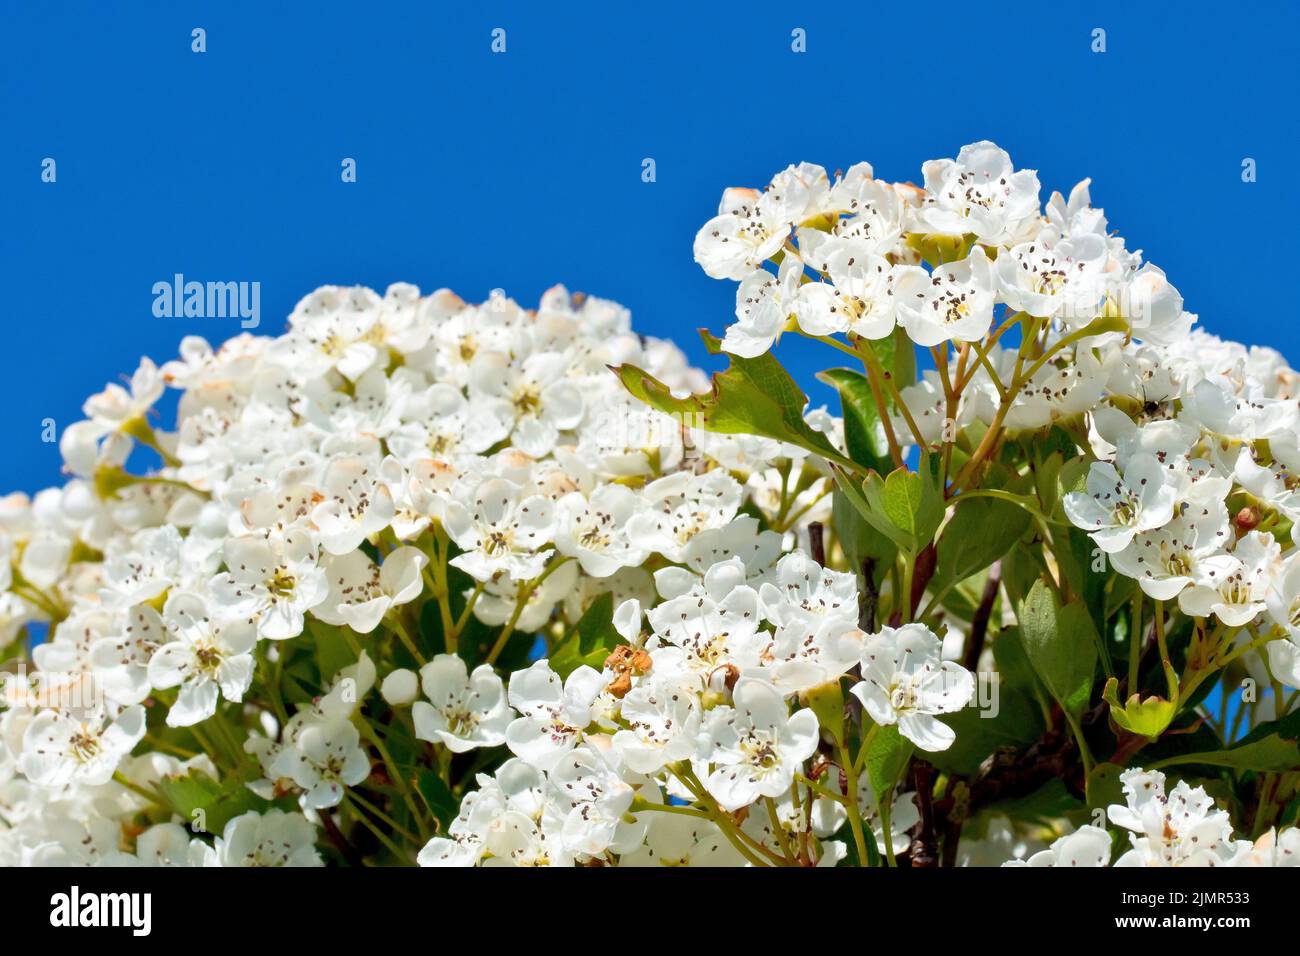 Hawthorn, Whitethorn or May Tree (crataegus monogyna), close up showing the white flowers or blossom of the tree against a clear blue sky. Stock Photo